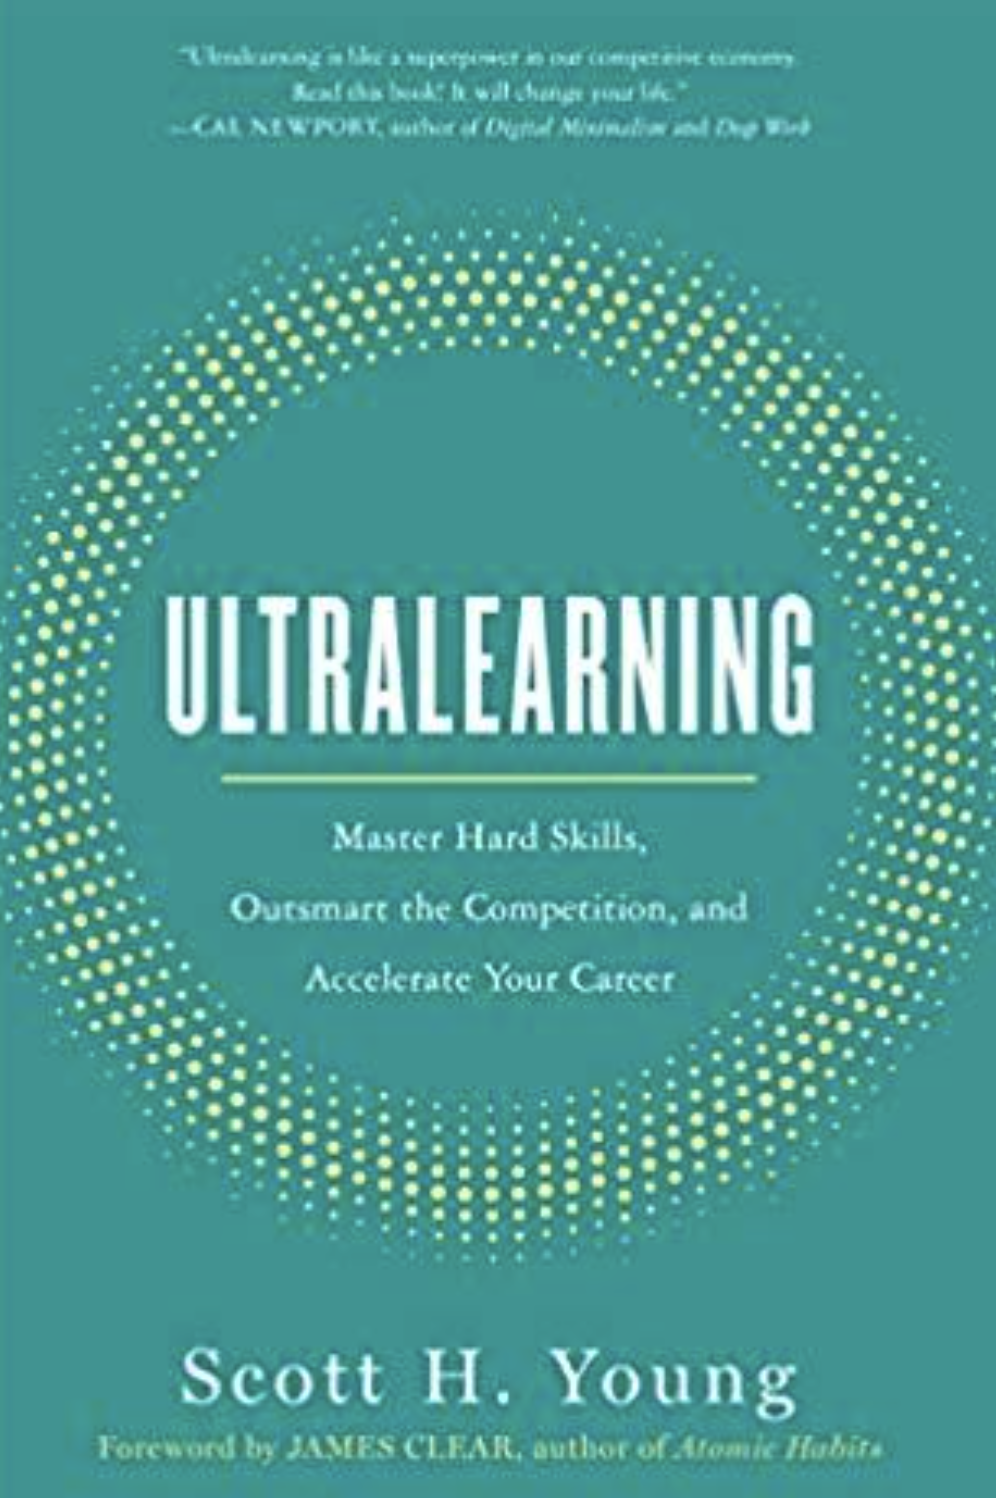 Notes on "Ultralearning"